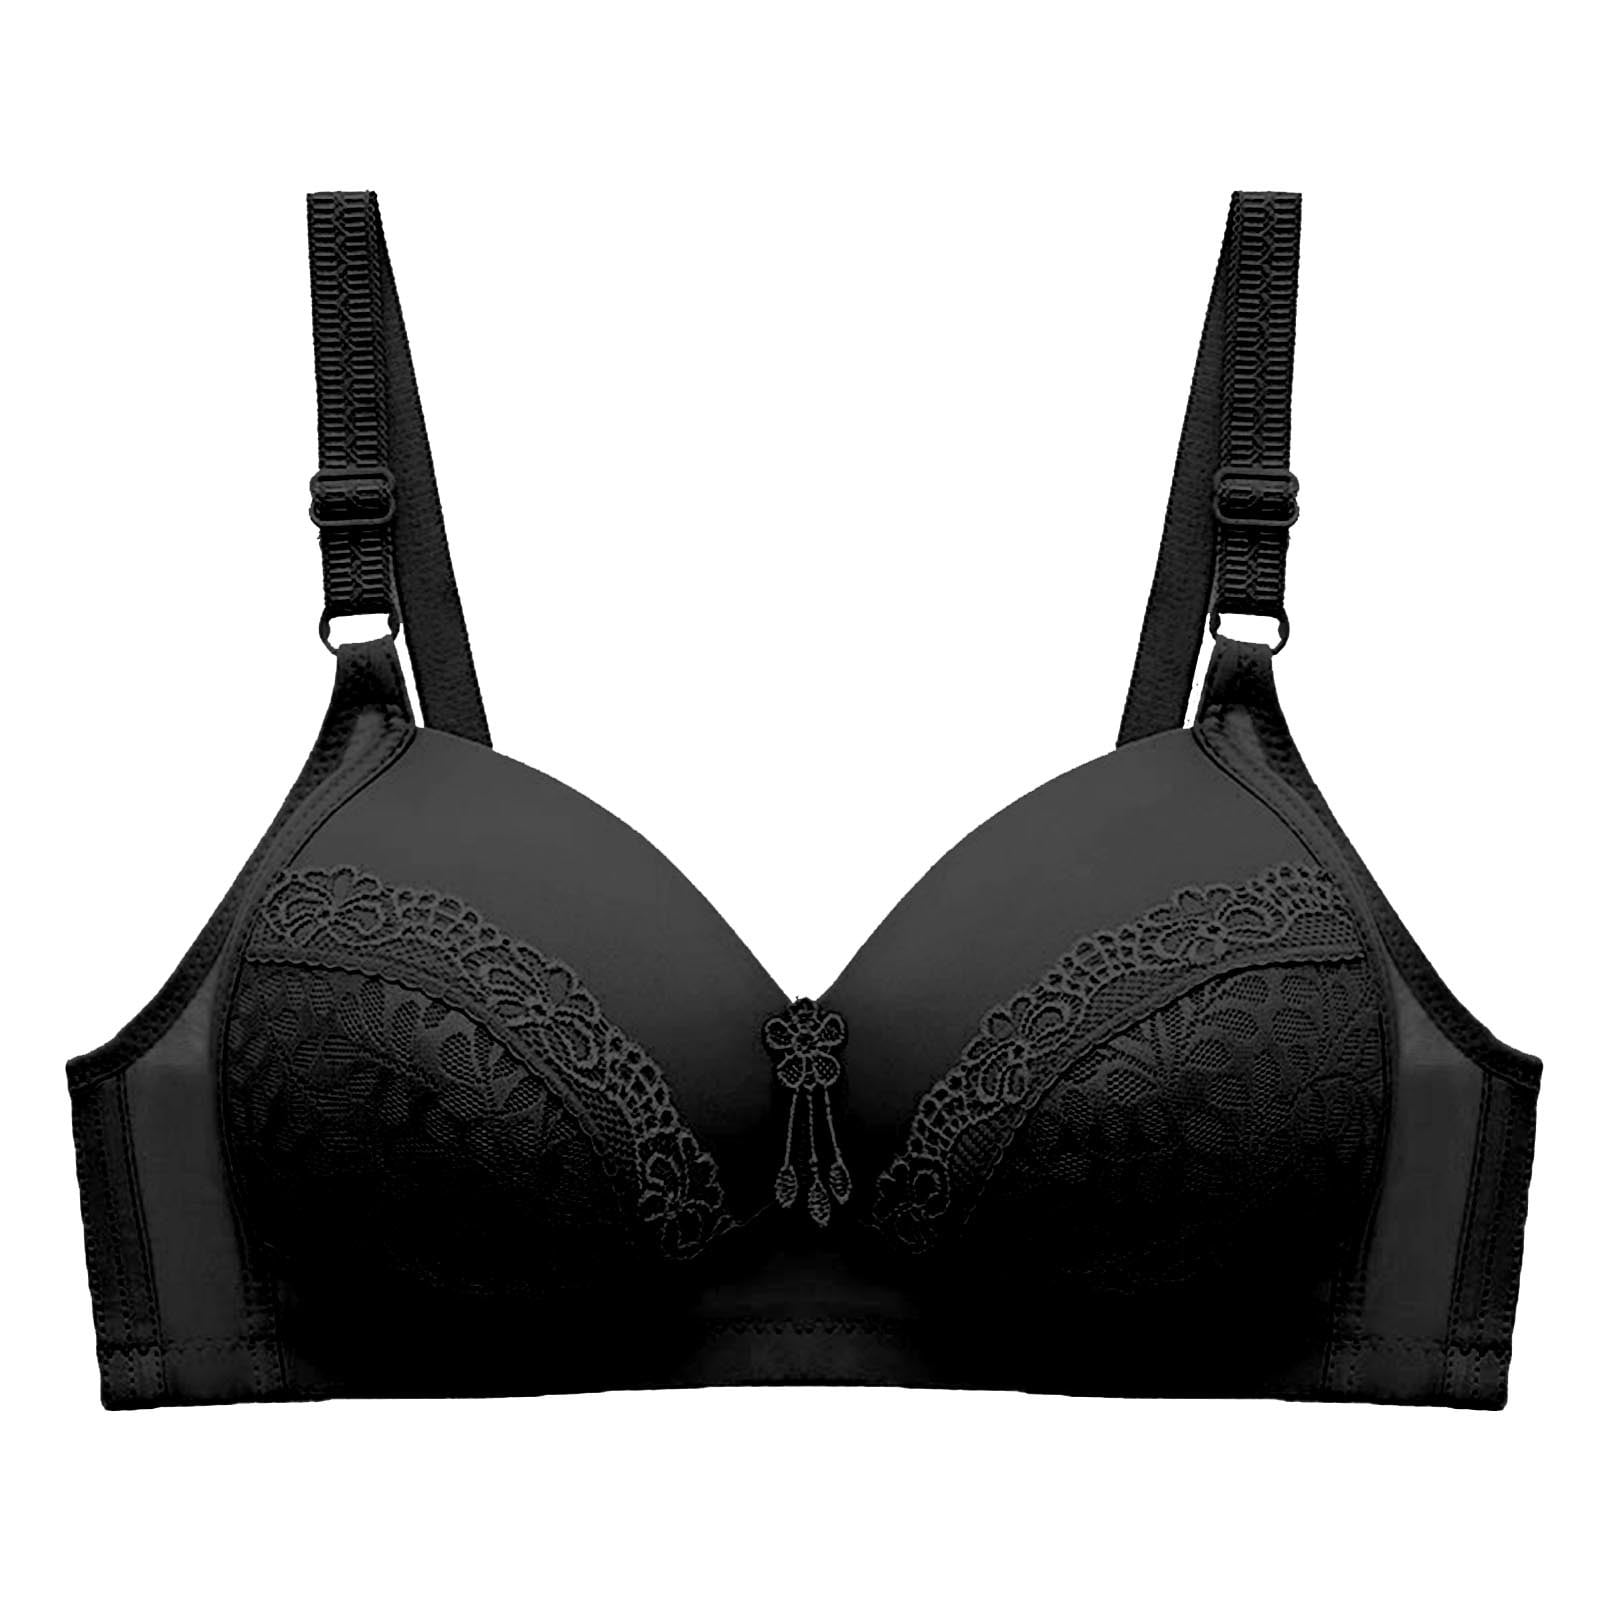 HTNBO Plus Size Wireless Bra for Women Wirefree Comfort Underwear Front Closure Solid Color Black XL